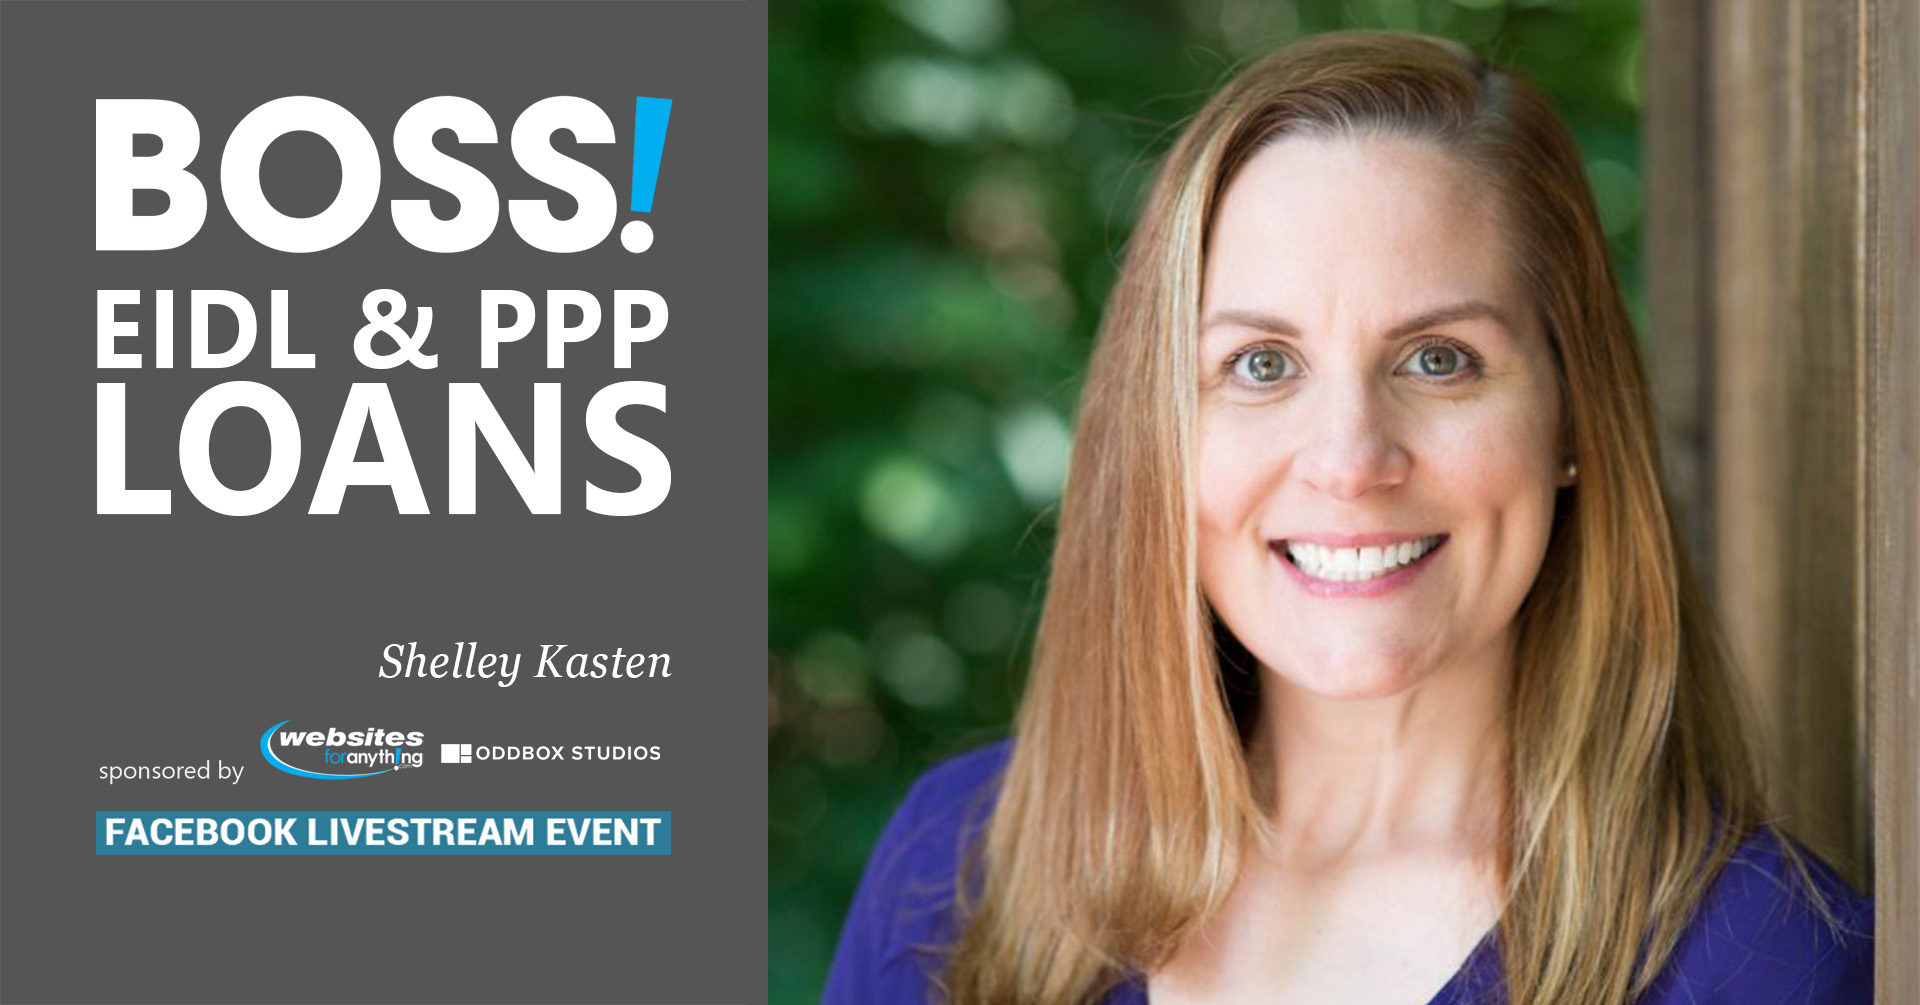 EIDL and PPP Loan with Shelley Kasten at BOSS on July 21st 2020